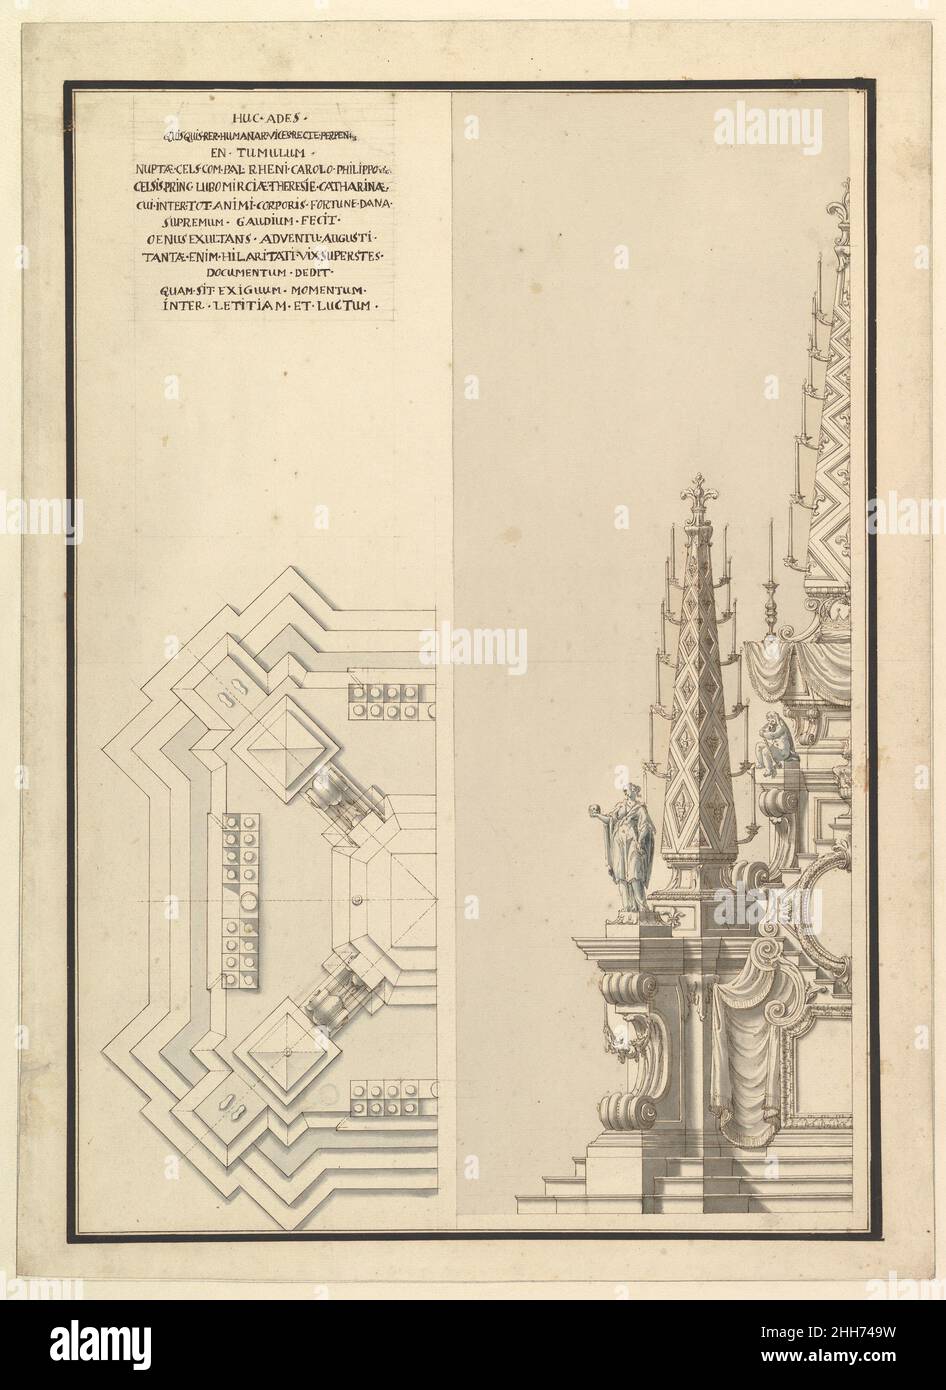 Design for Half Elevation and Half Ground Plan of a Catafalque for Countess Palatine of the Rhine, Theresia Catharine, wife of Count Palatine, Charles Philip III (1716-1742). around 1742 Workshop of Giuseppe Galli Bibiena Italian. Design for Half Elevation and Half Ground Plan of a Catafalque for Countess Palatine of the Rhine, Theresia Catharine, wife of Count Palatine, Charles Philip III (1716-1742).  344512 Stock Photo